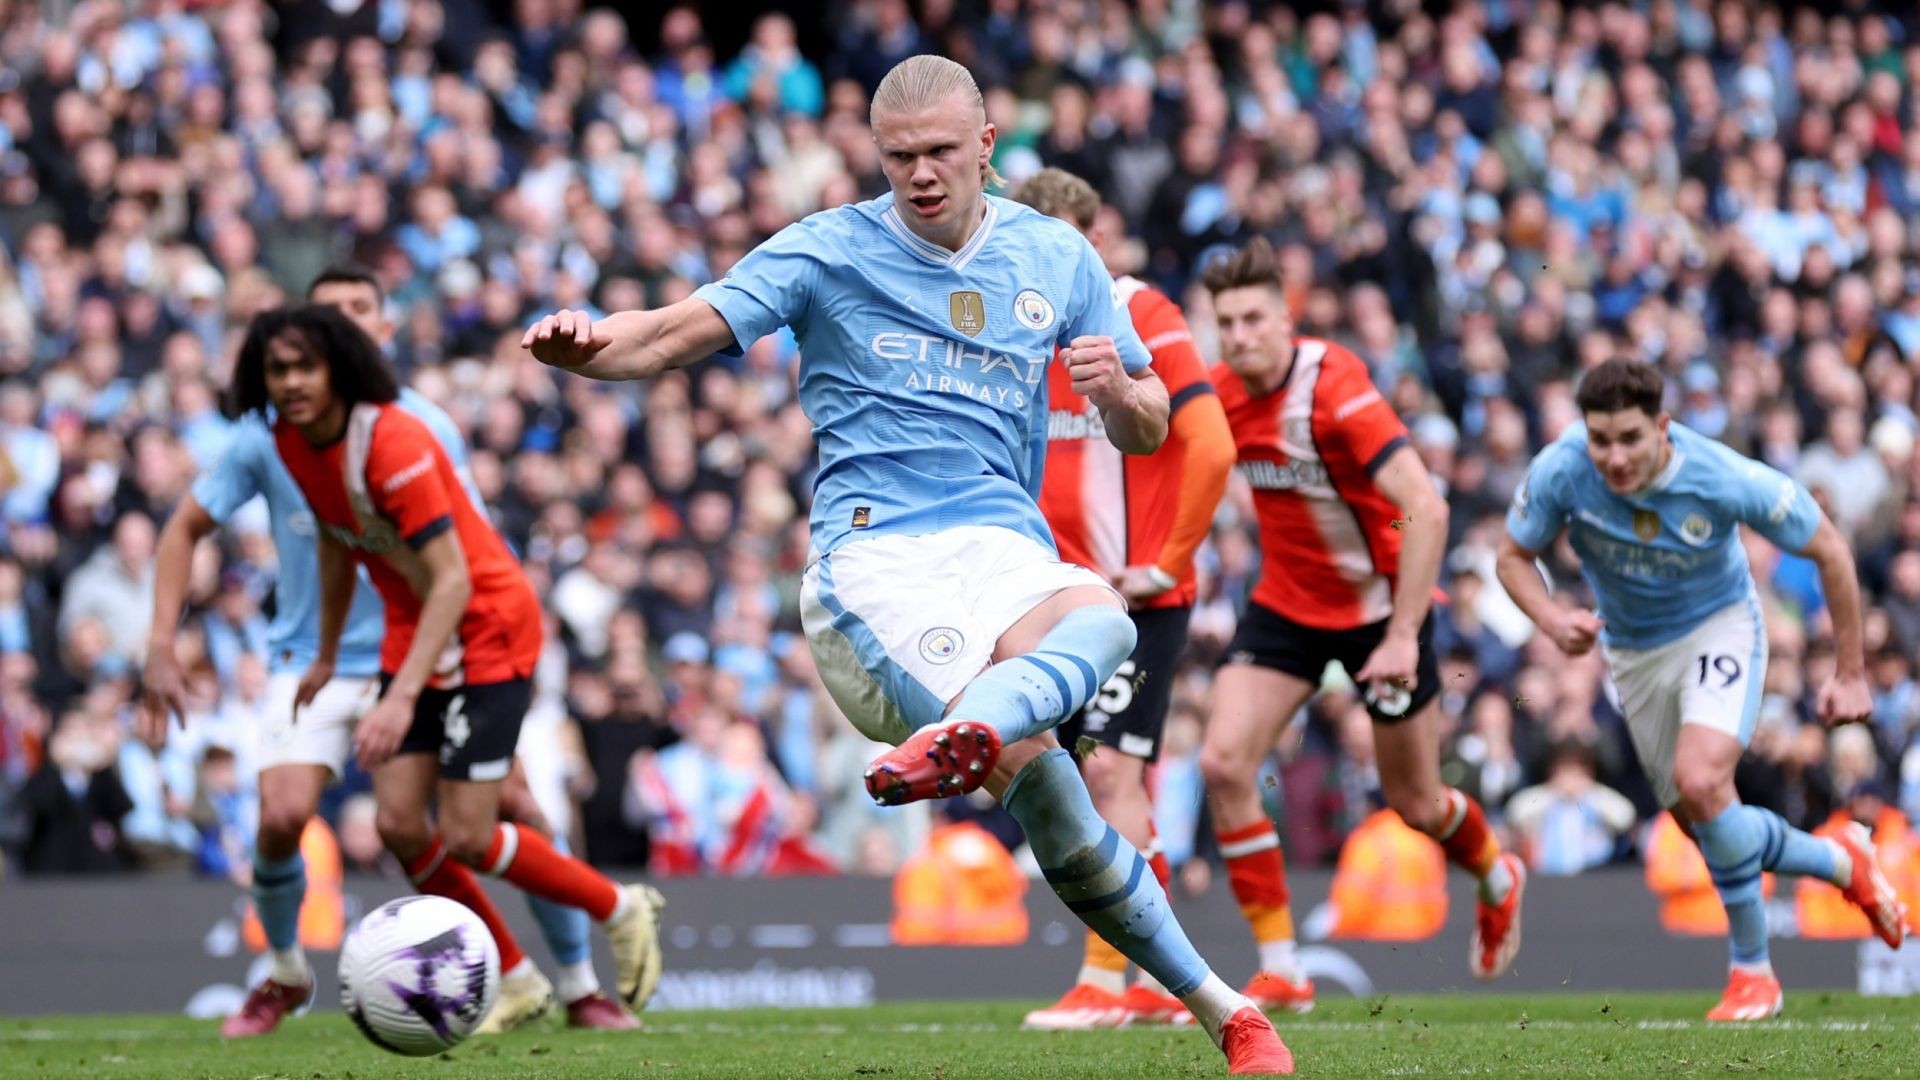 Manchester City vs Luton Town full match replay and highlights